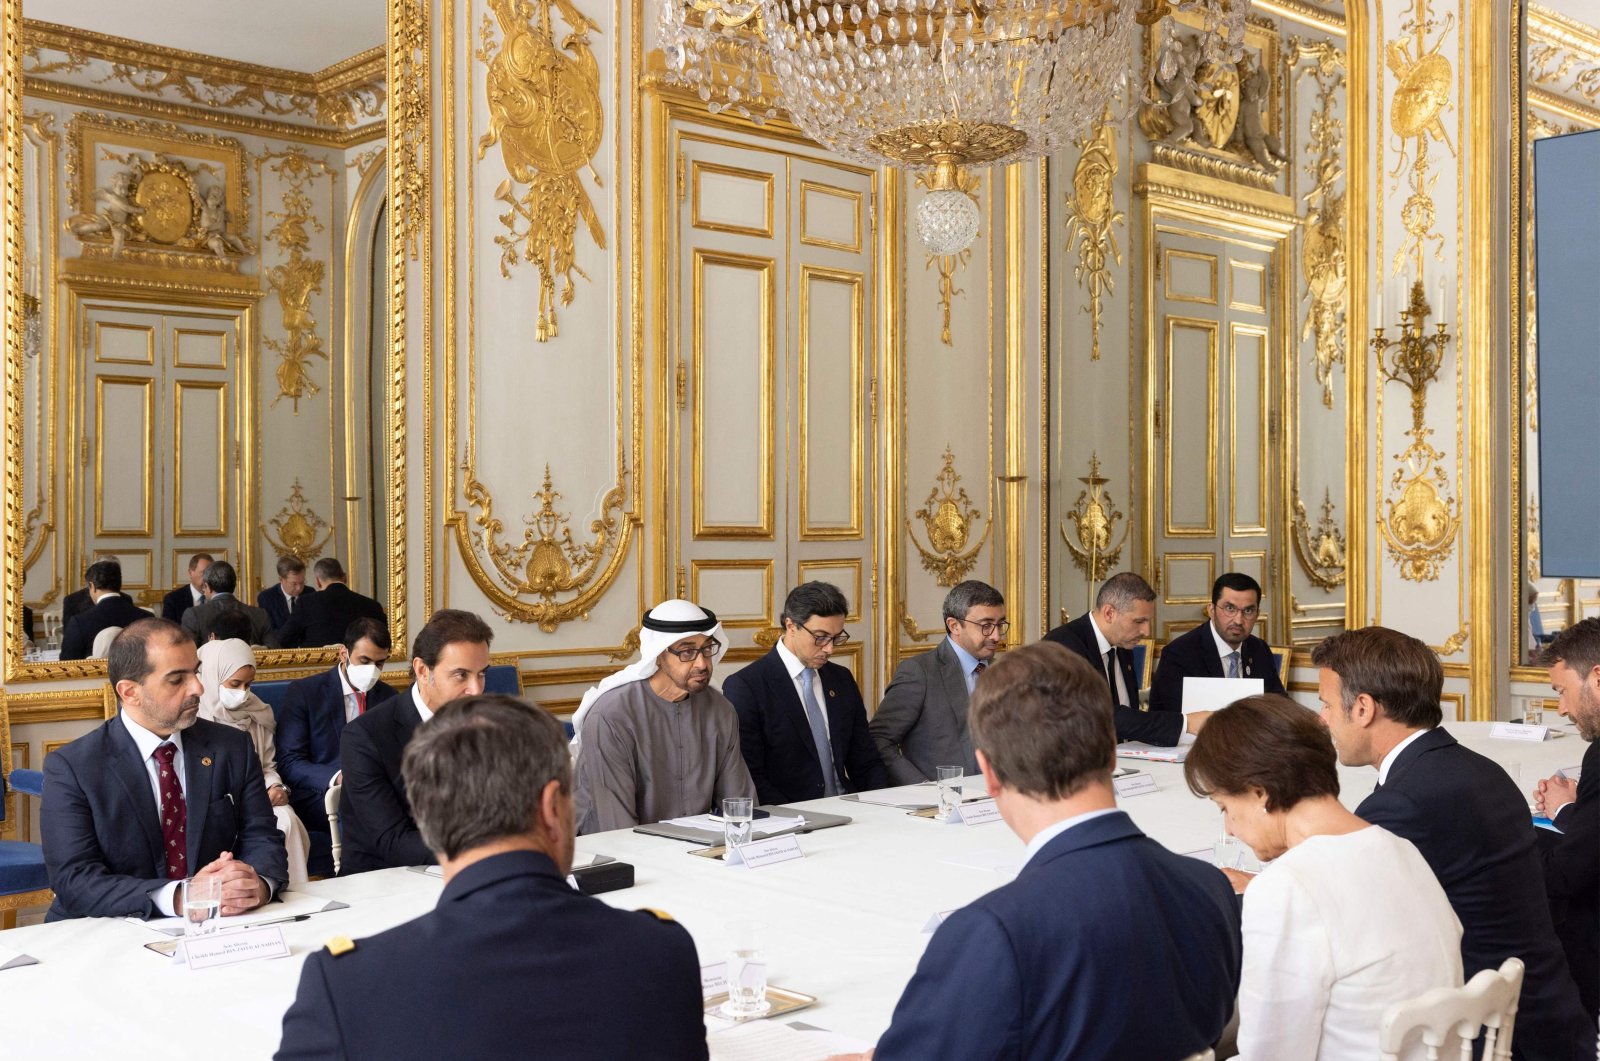 This handout image provided by the UAE Ministry of Presidential Affairs shows (L to R) UAE&#039;s President Sheikh Mohamed bin Zayed Al Nahyan meeting with France&#039;s President Emmanuel Macron at the Elysee Palace in Paris on July 18, 2022, as part of Sheikh Mohammed&#039;s first overseas state visit with energy and transport deals on the agenda. (AFP Photo)